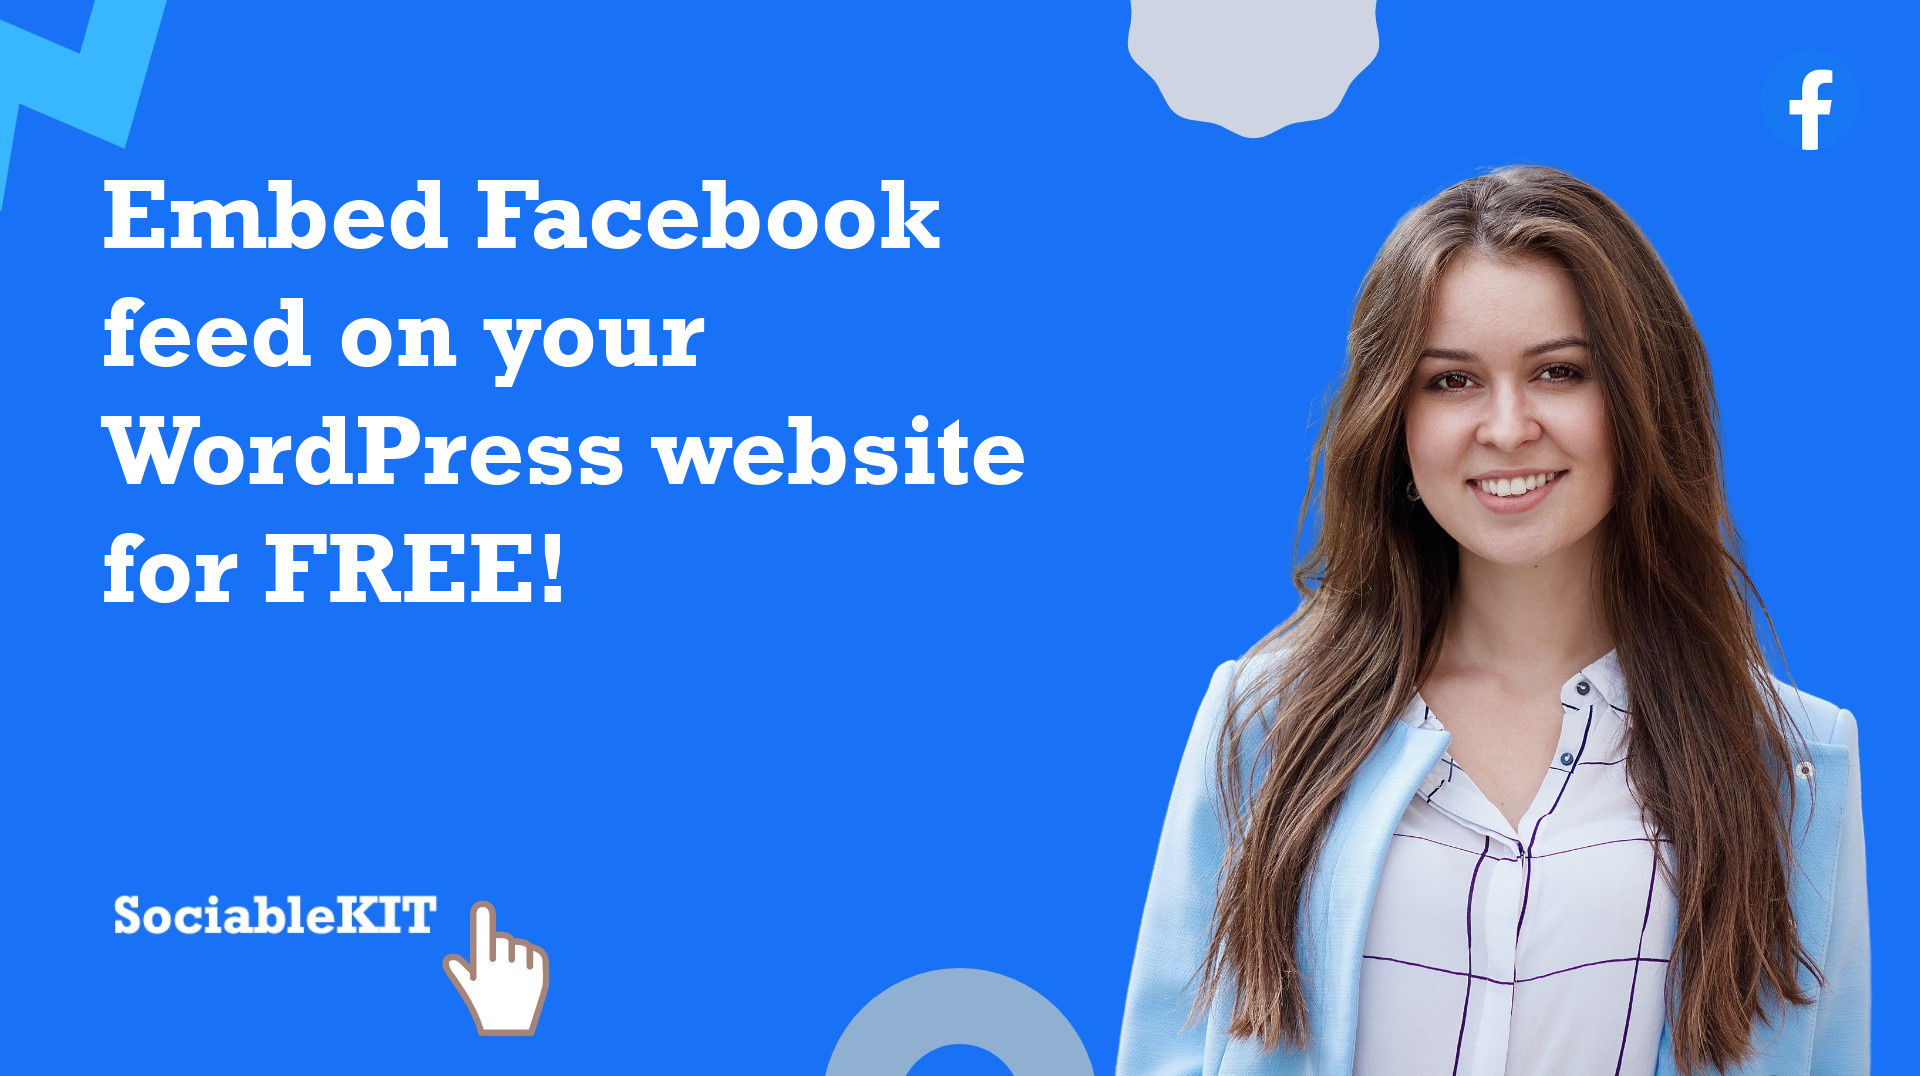 How to embed Facebook feed on your WordPress website for FREE?